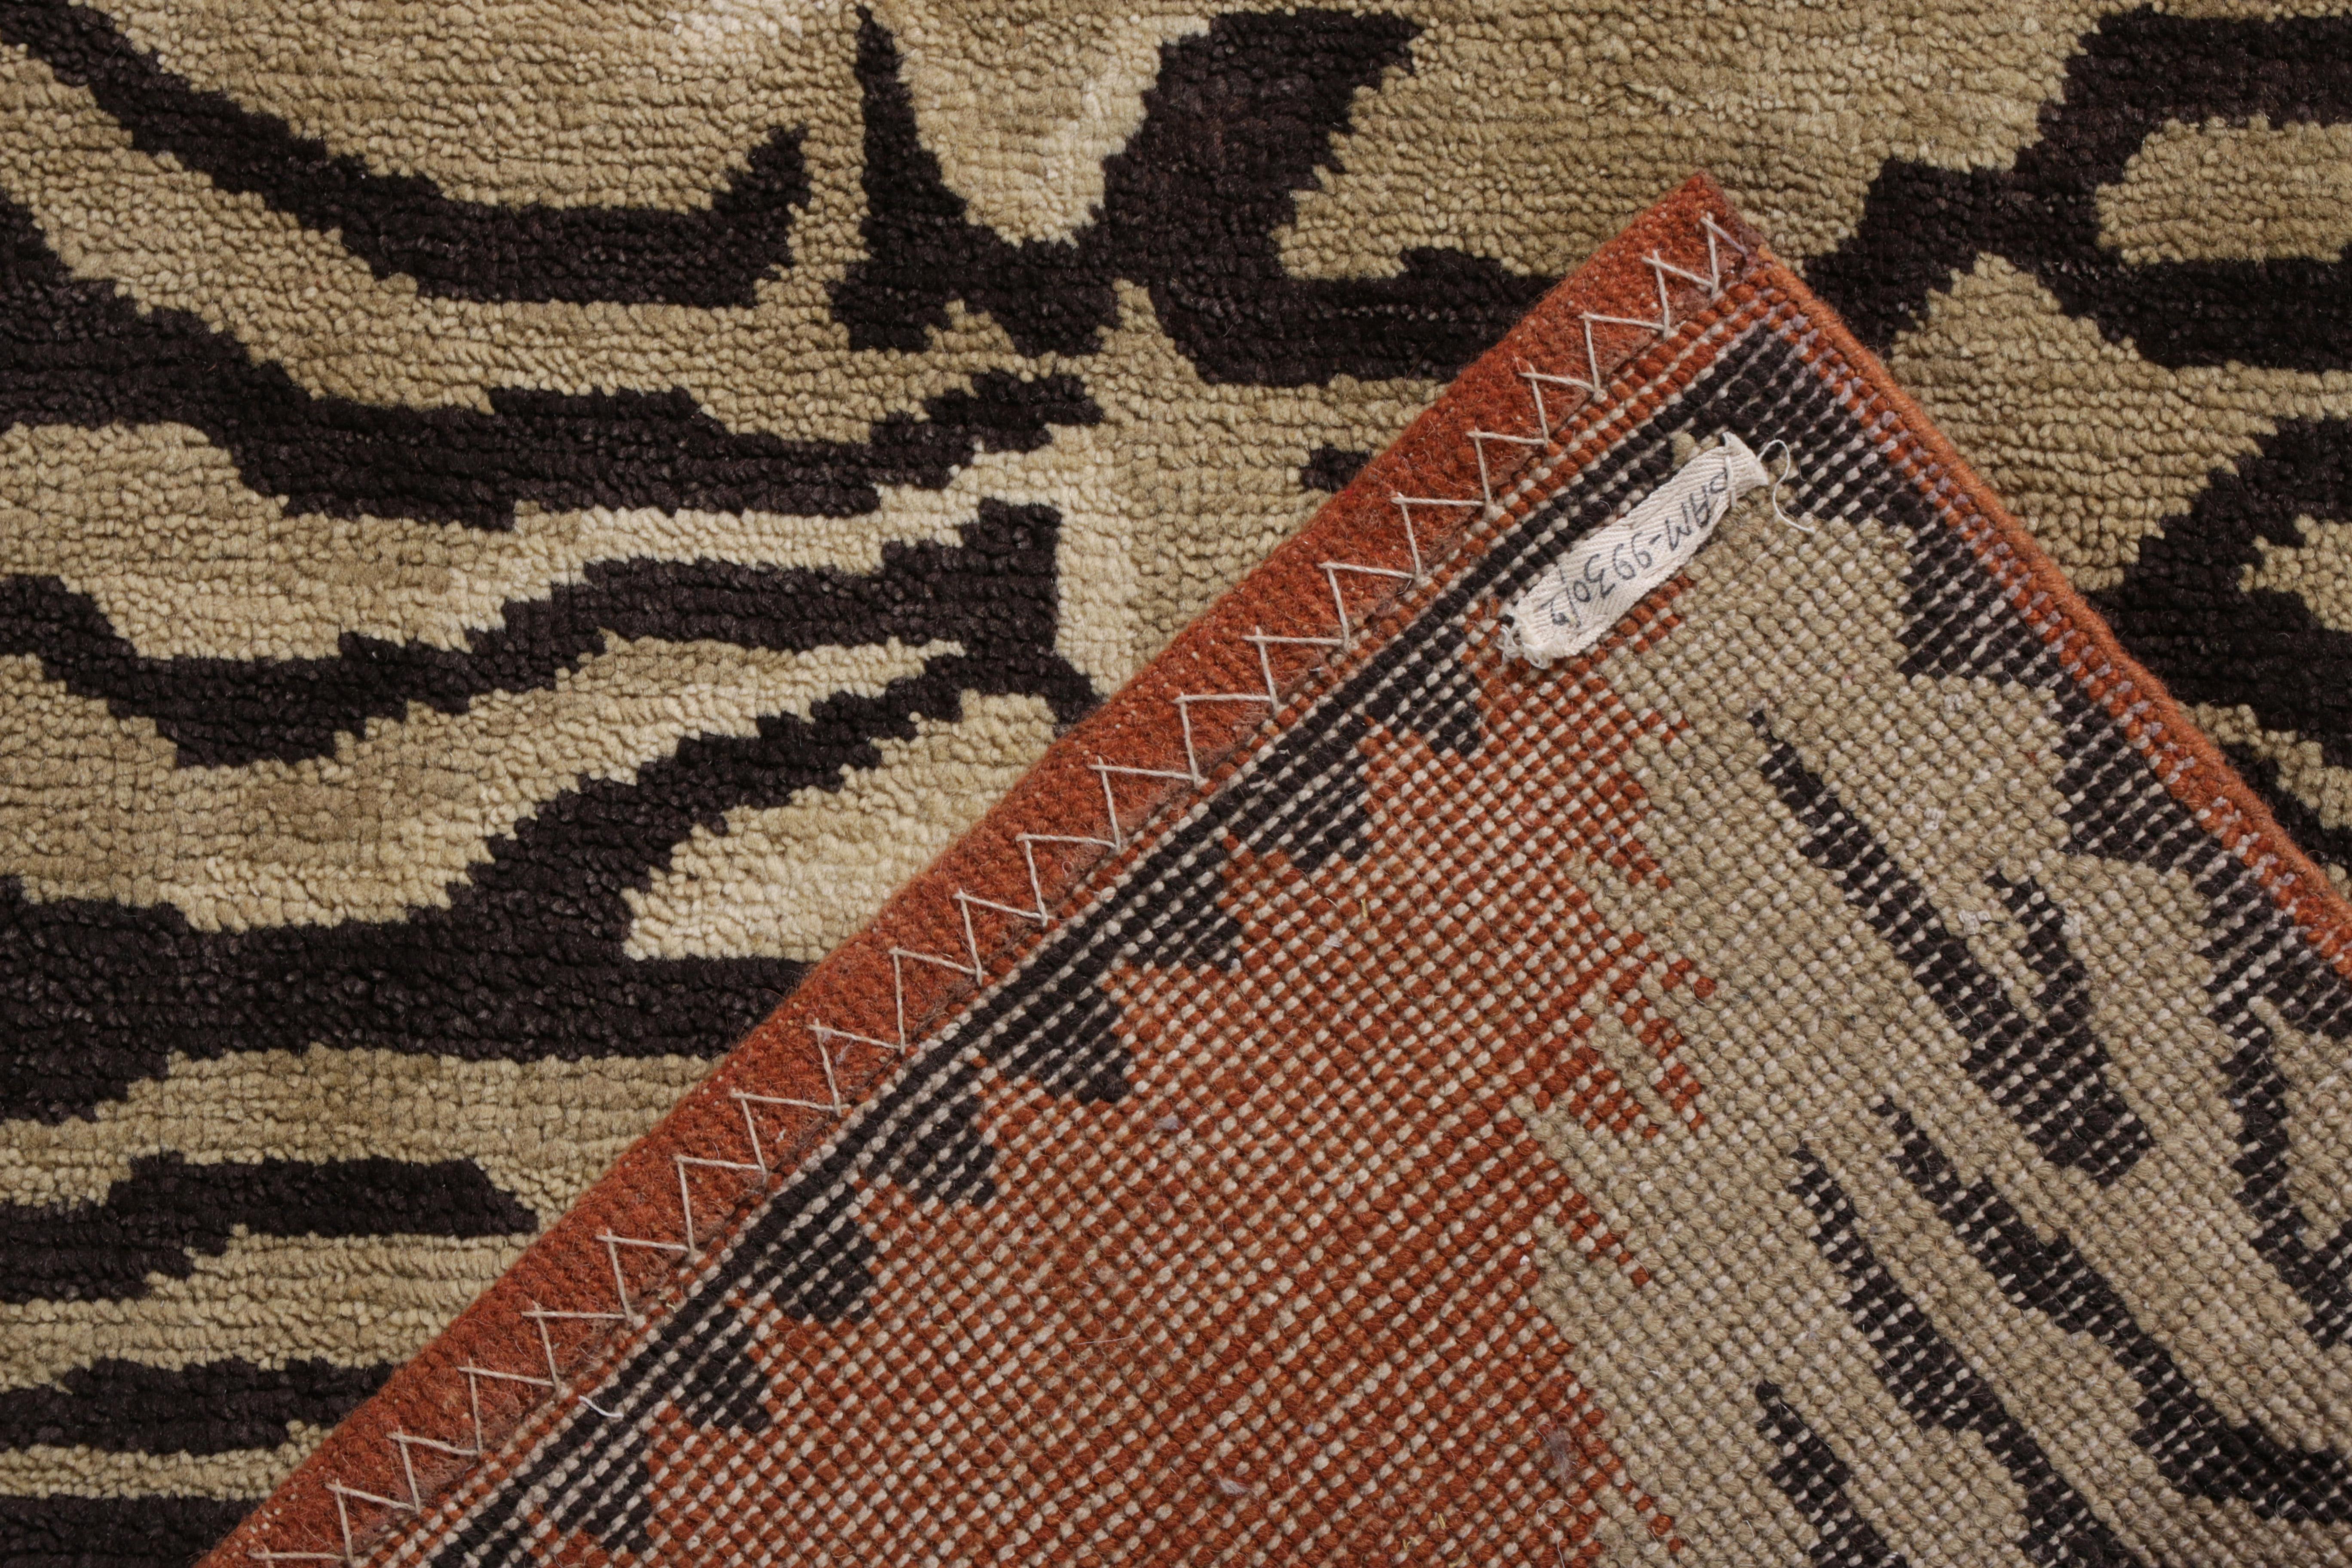 Hand-Knotted Rug & Kilim's Hand Knotted Tiger Rug in Beige Brown Pictorial Pattern